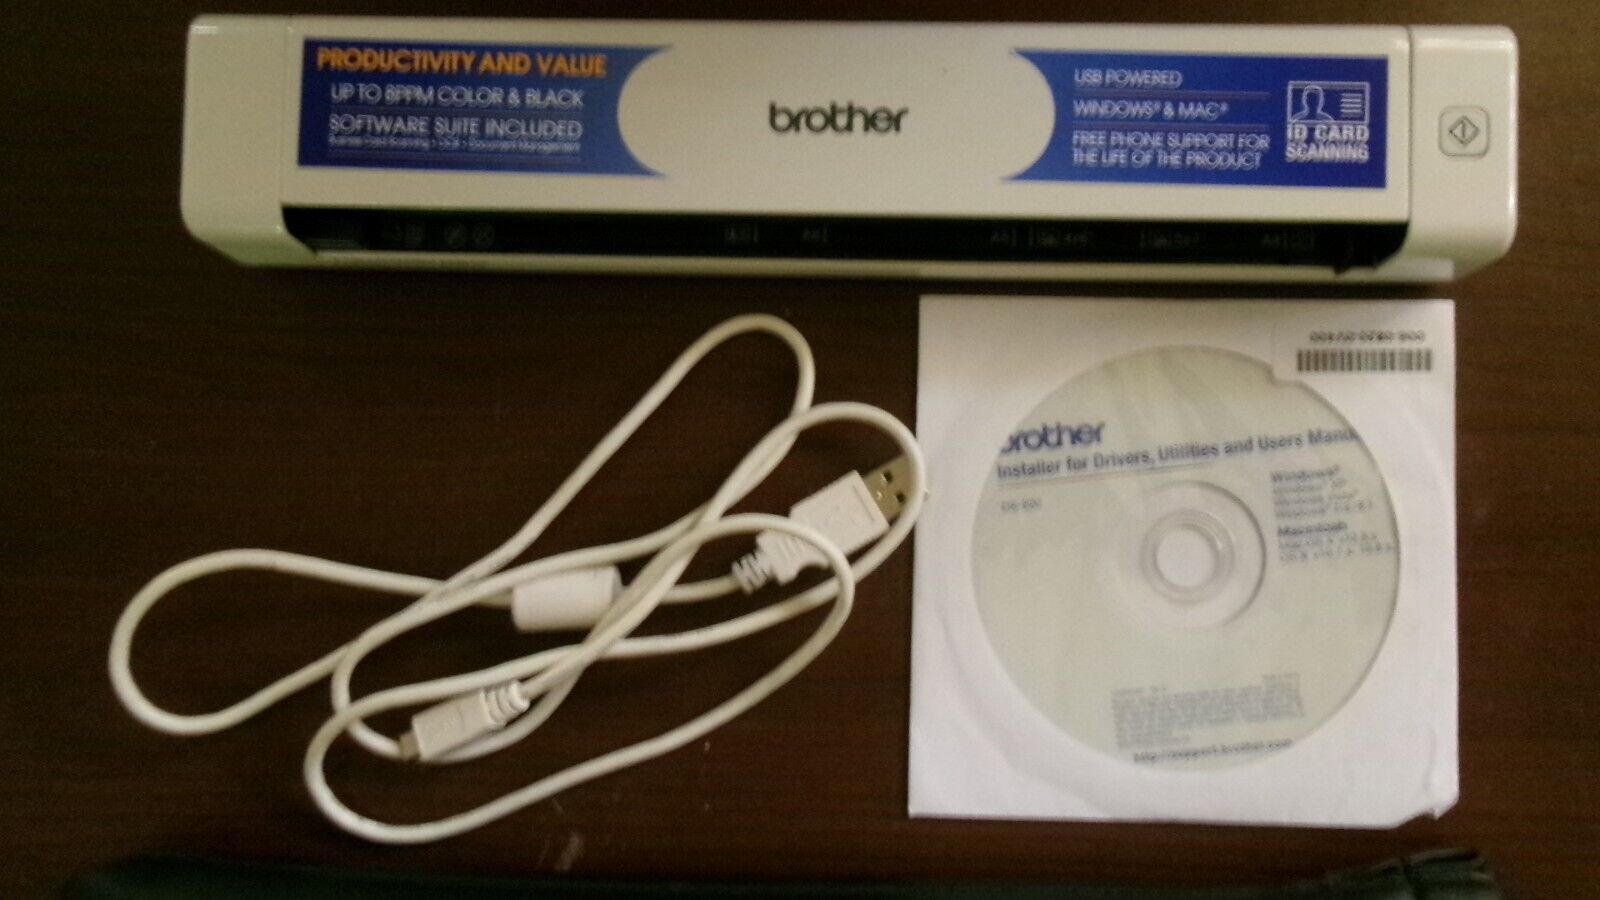 BROTHER SCANNER DS620 - COMES WITH CORD, COVER, MANUALS, DISKS, CLEANER SHEETS